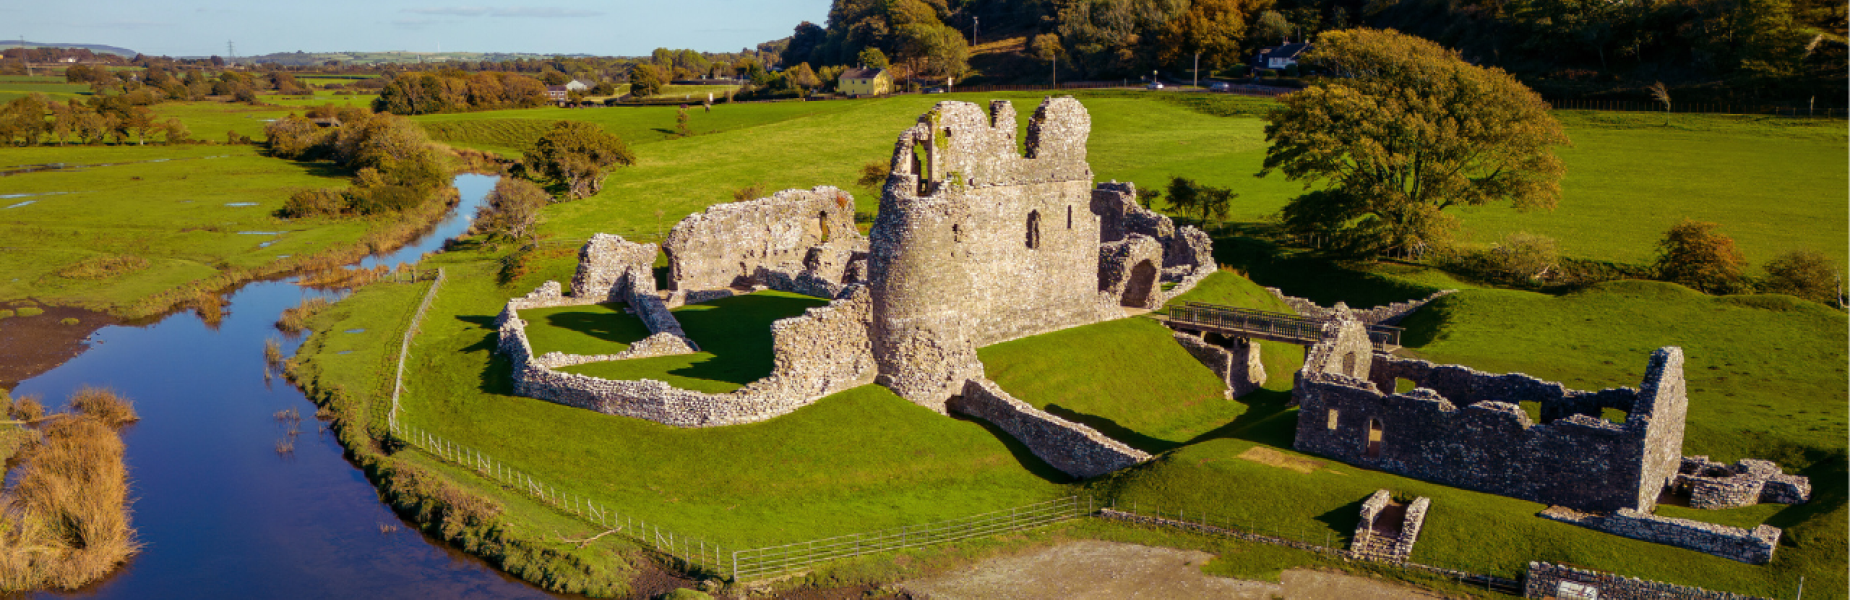 Image of Ogmore Castle